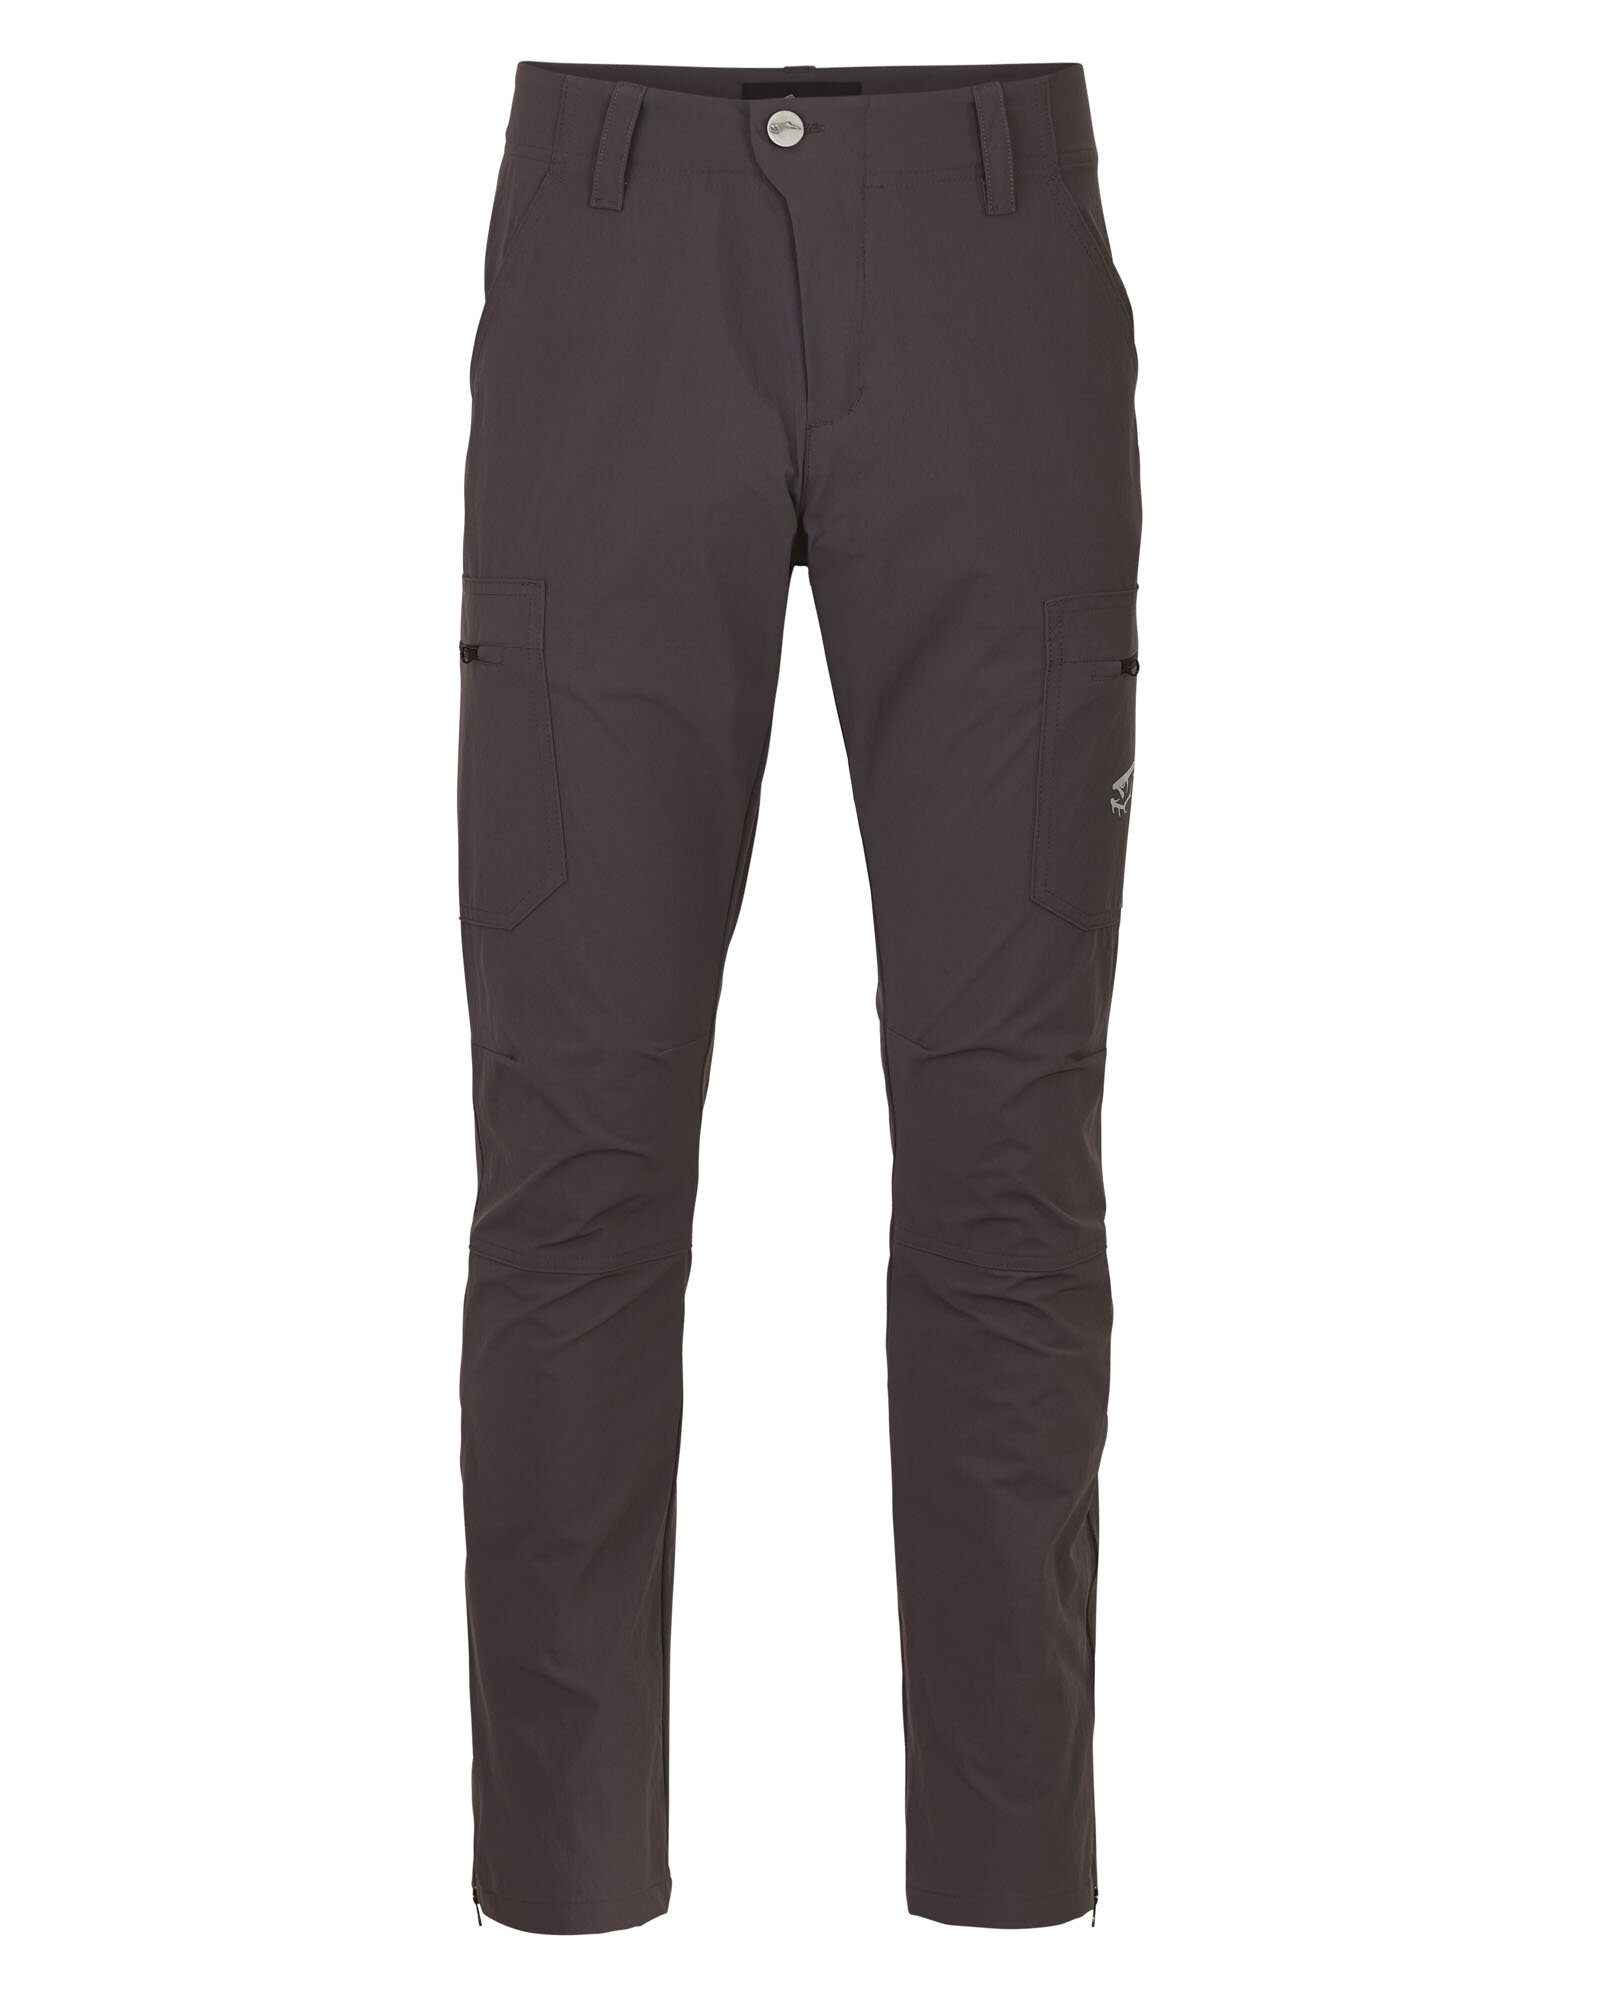 Pursuit Pants | Charcoal - Bow and Rod